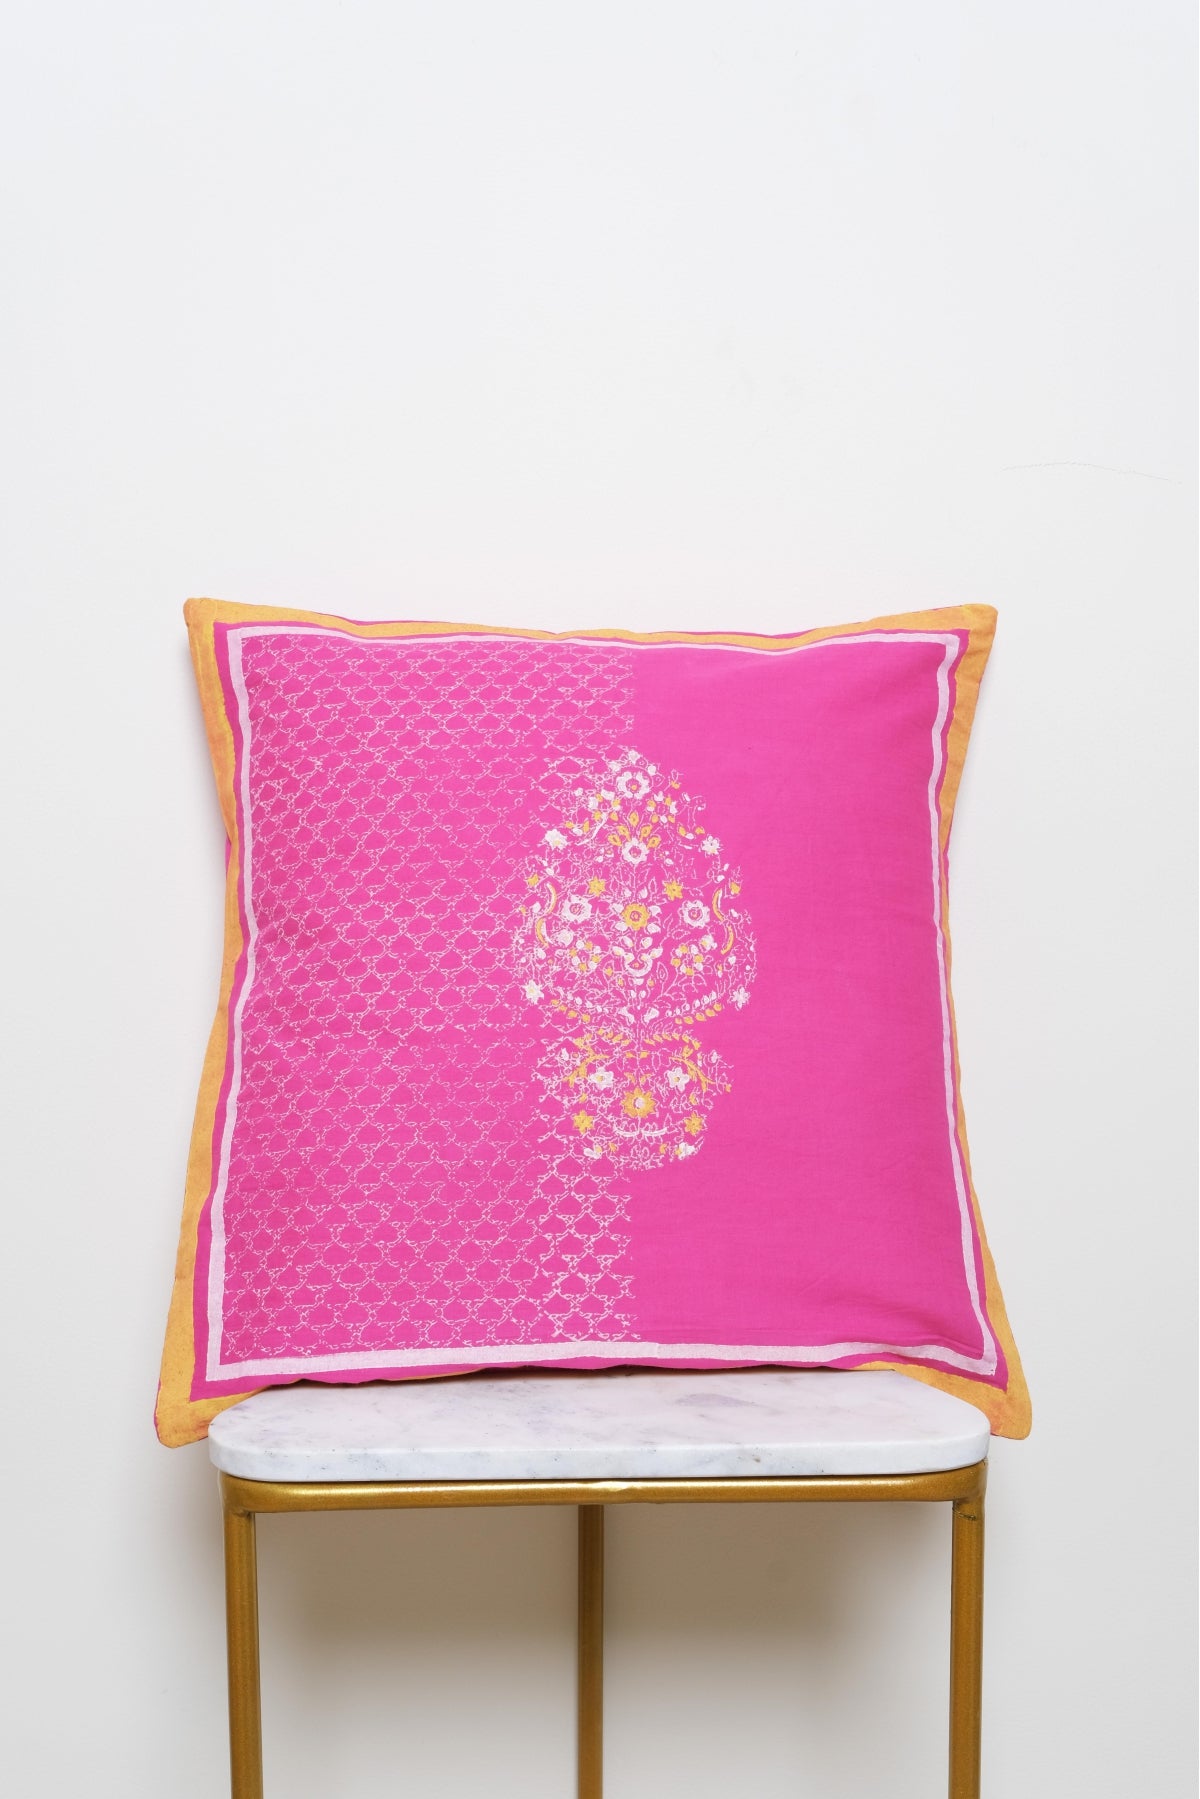 Jaal & Paisley Pink Cushion Cover 16*16 (set of 2)